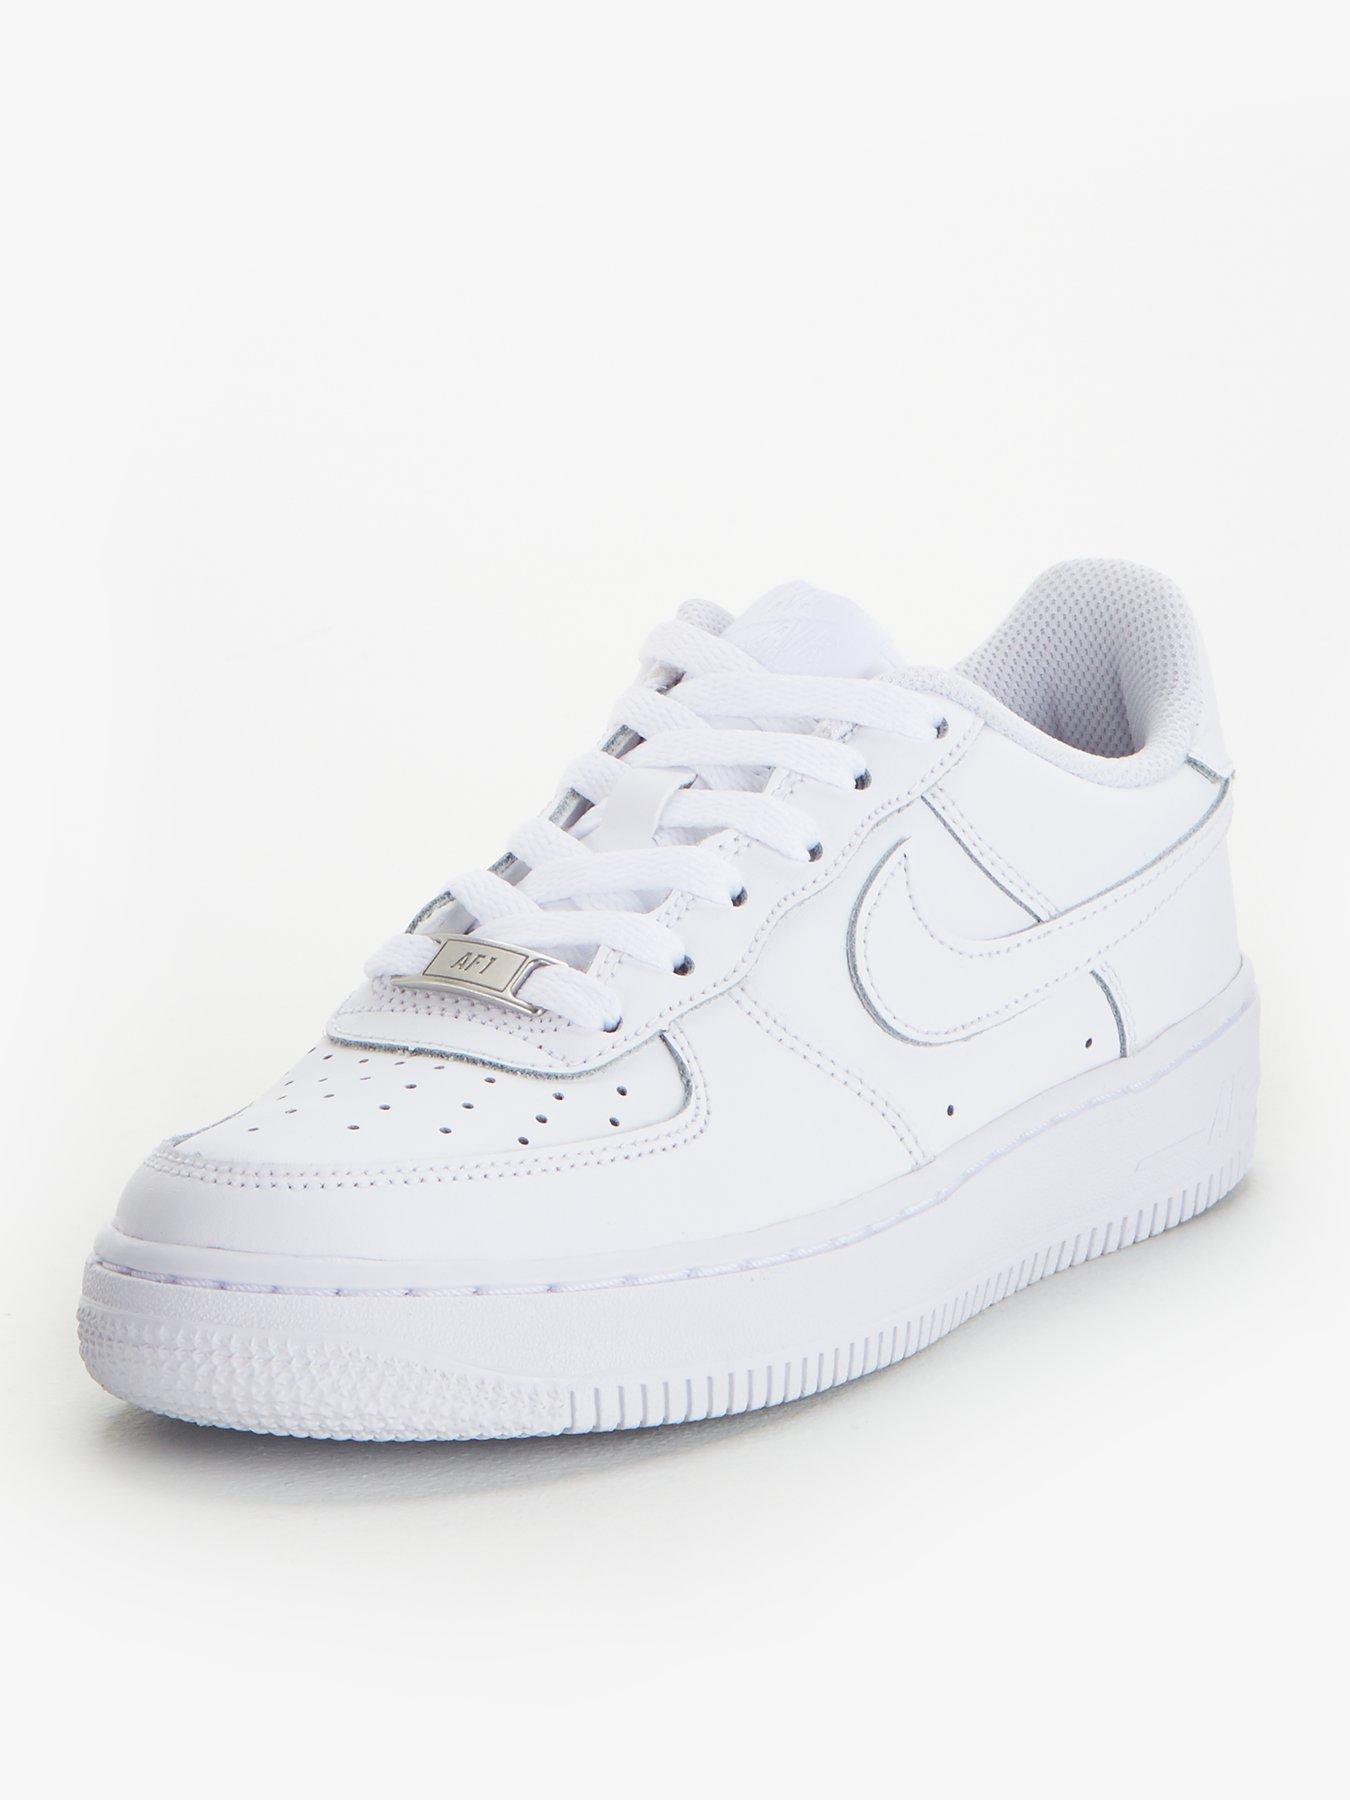 junior air force 1 white size 5